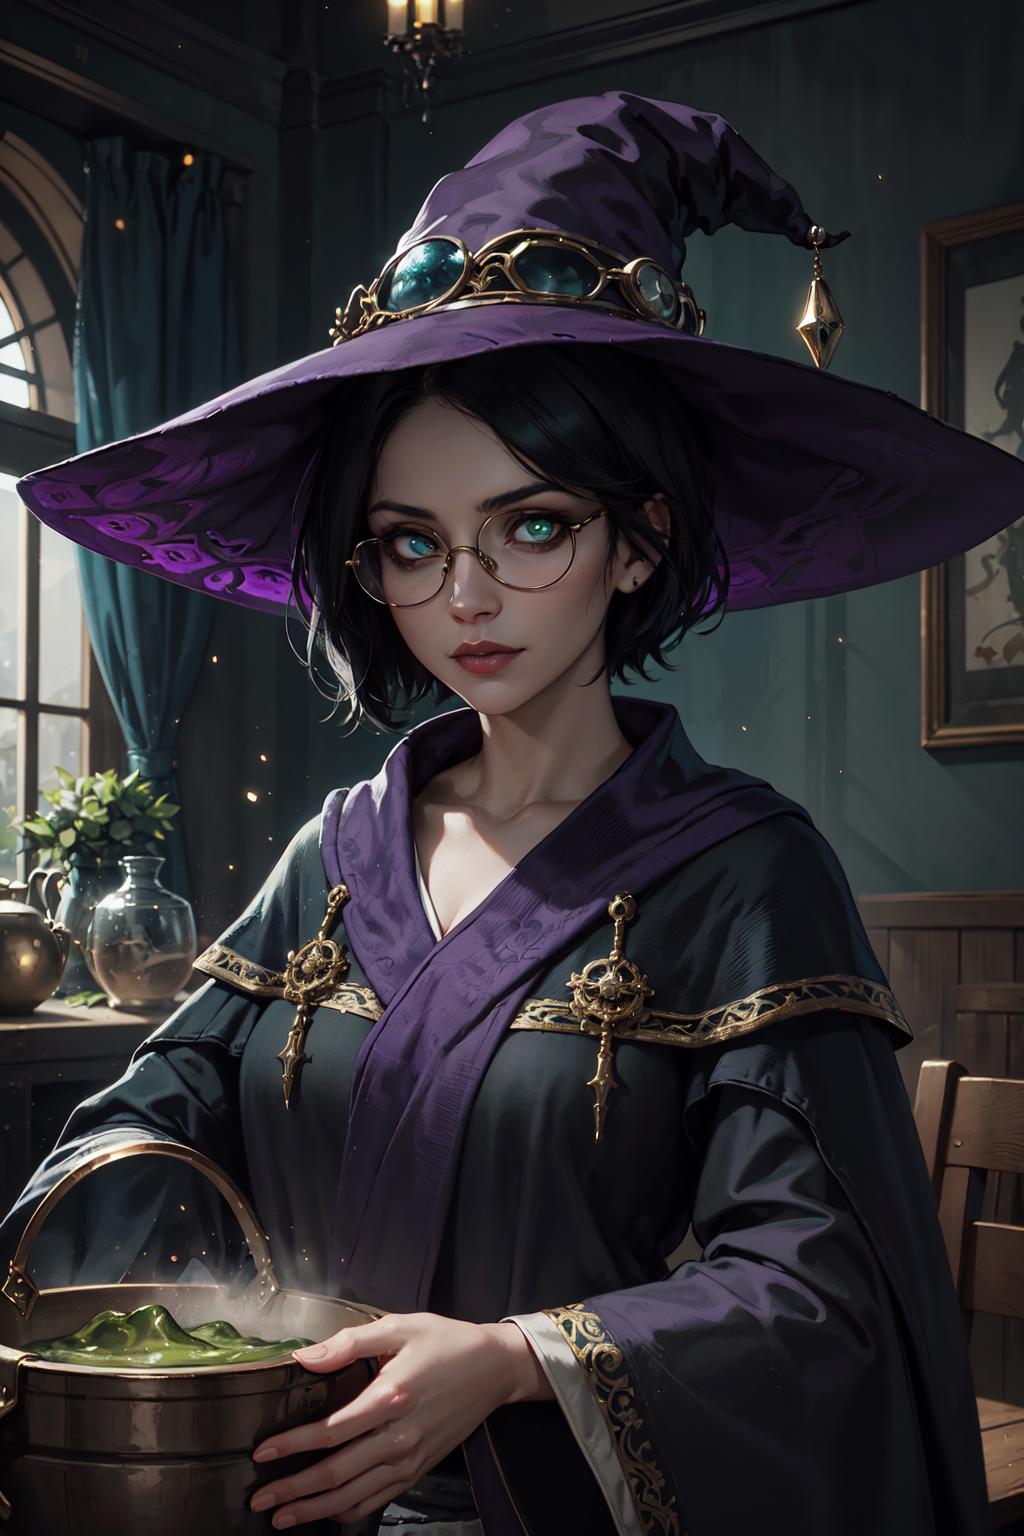 A woman wearing a purple witch hat, purple outfit, and glasses poses for a picture.